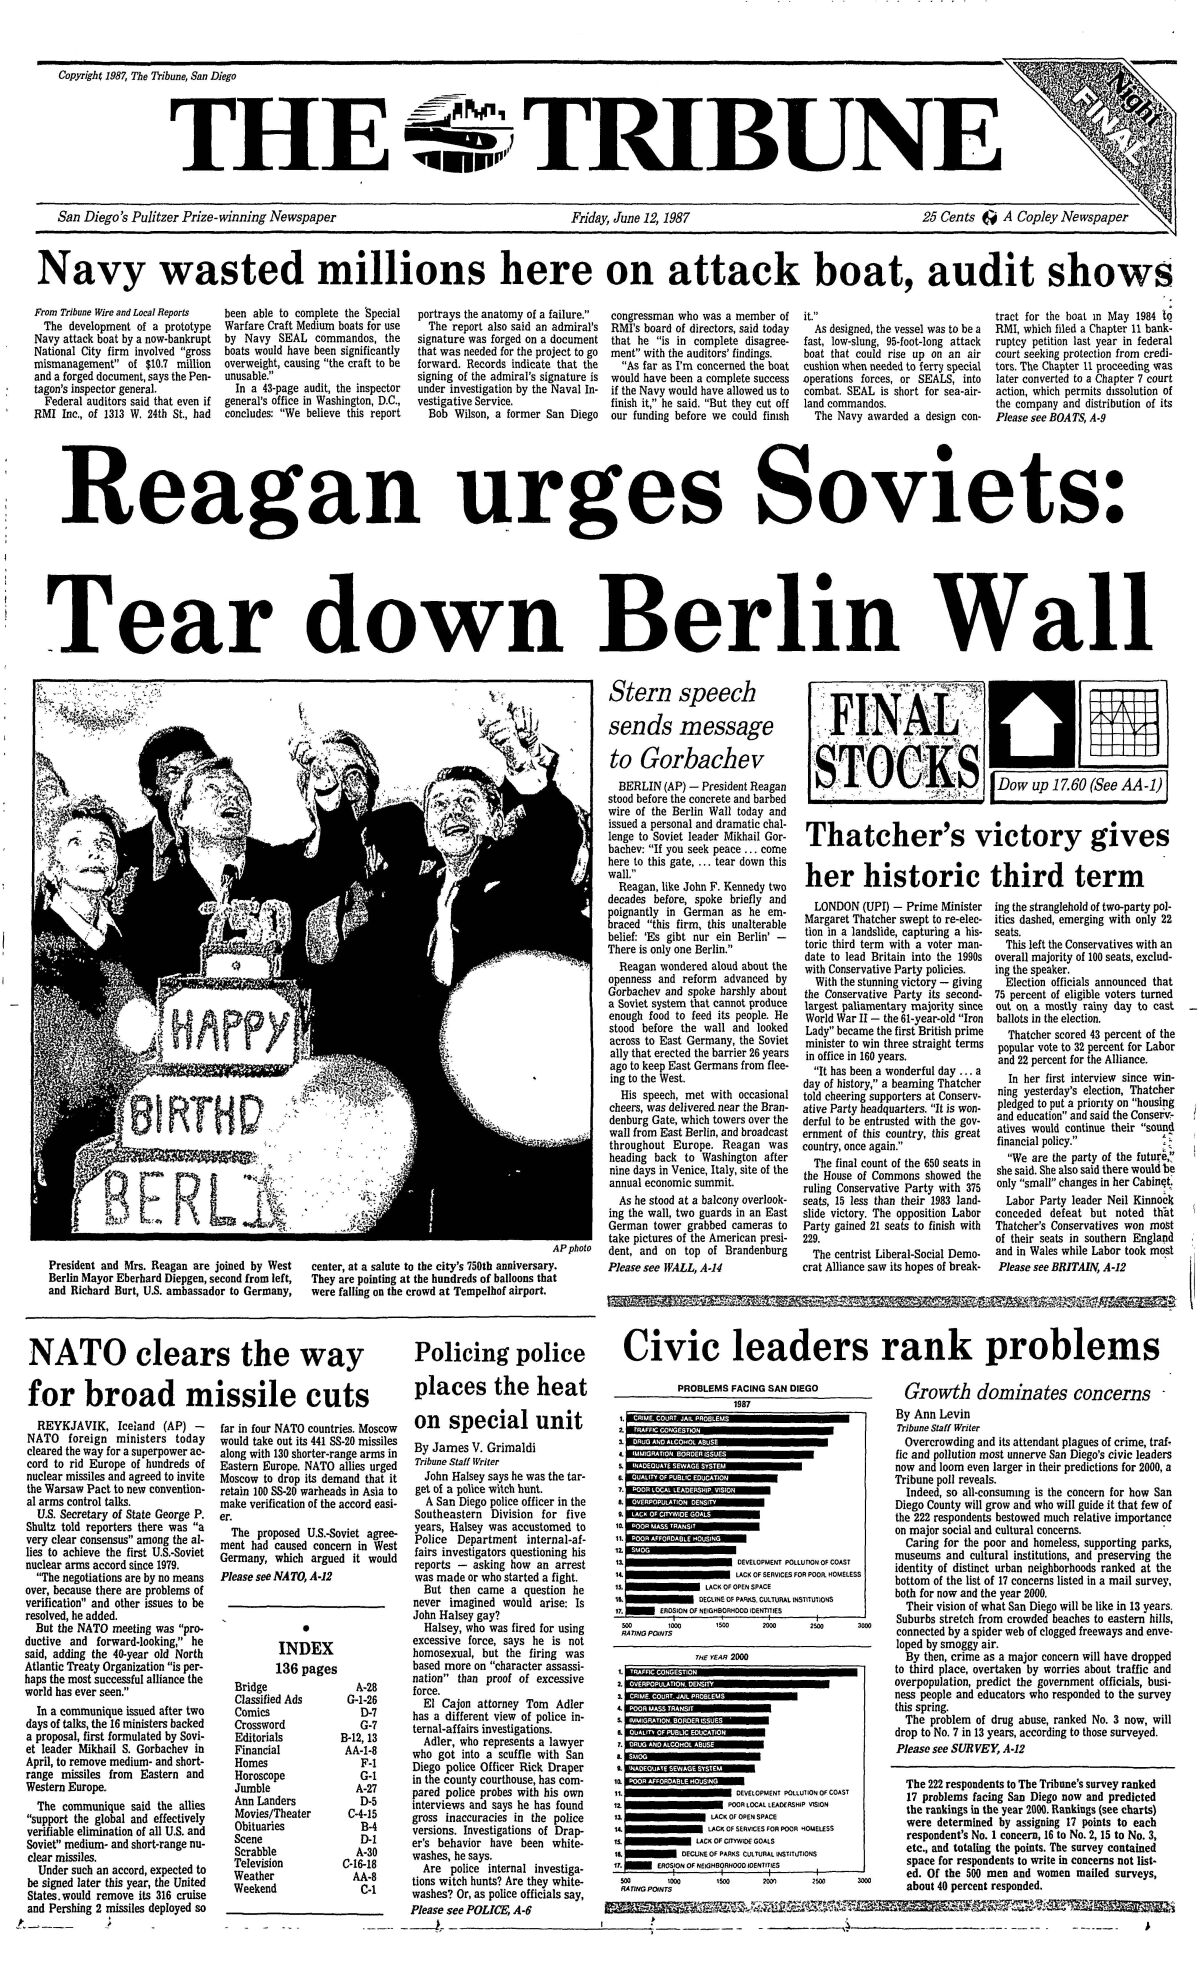 The front page of The Tribune, Friday, June 12, 1987.